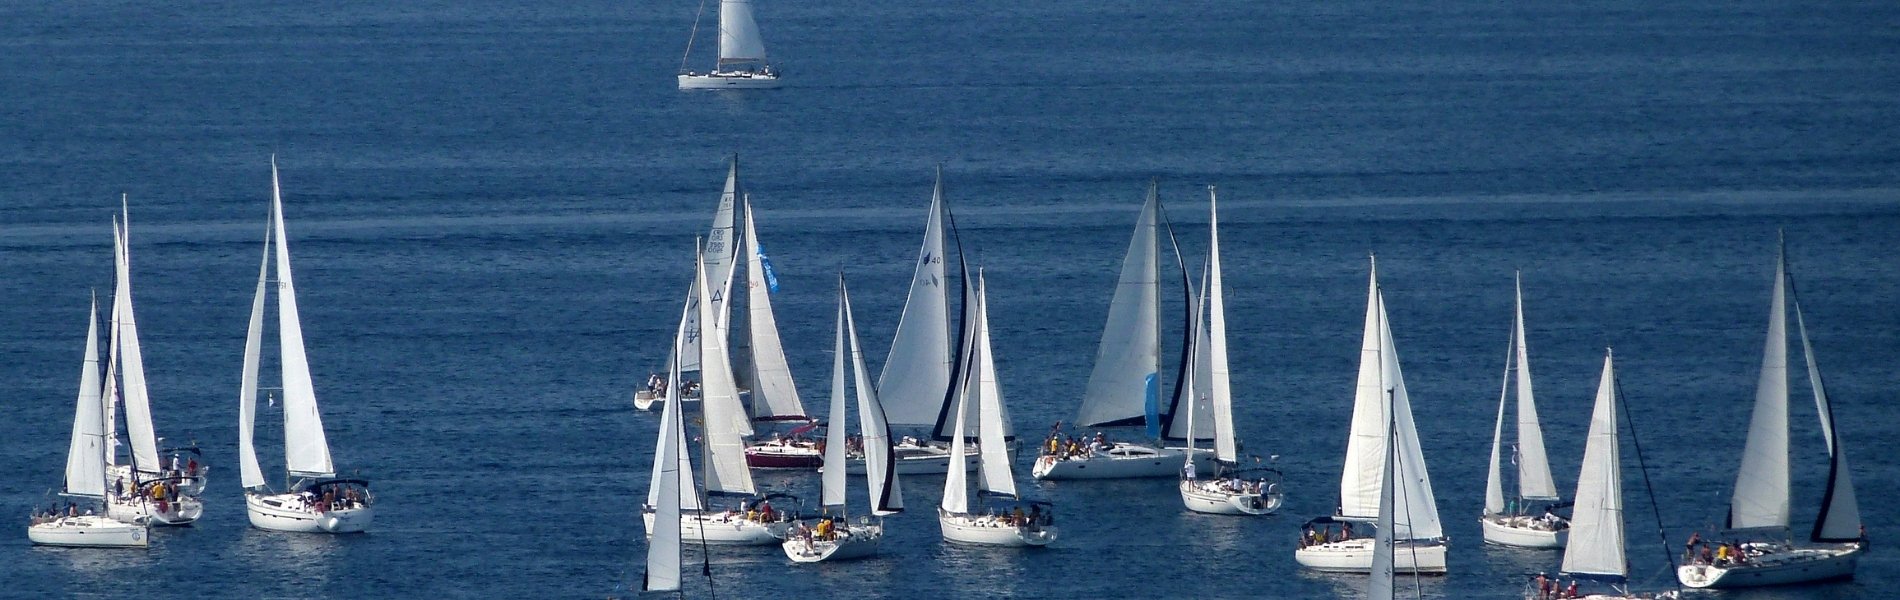 ugo® Will Be At The United States Sailboat Show 2022!